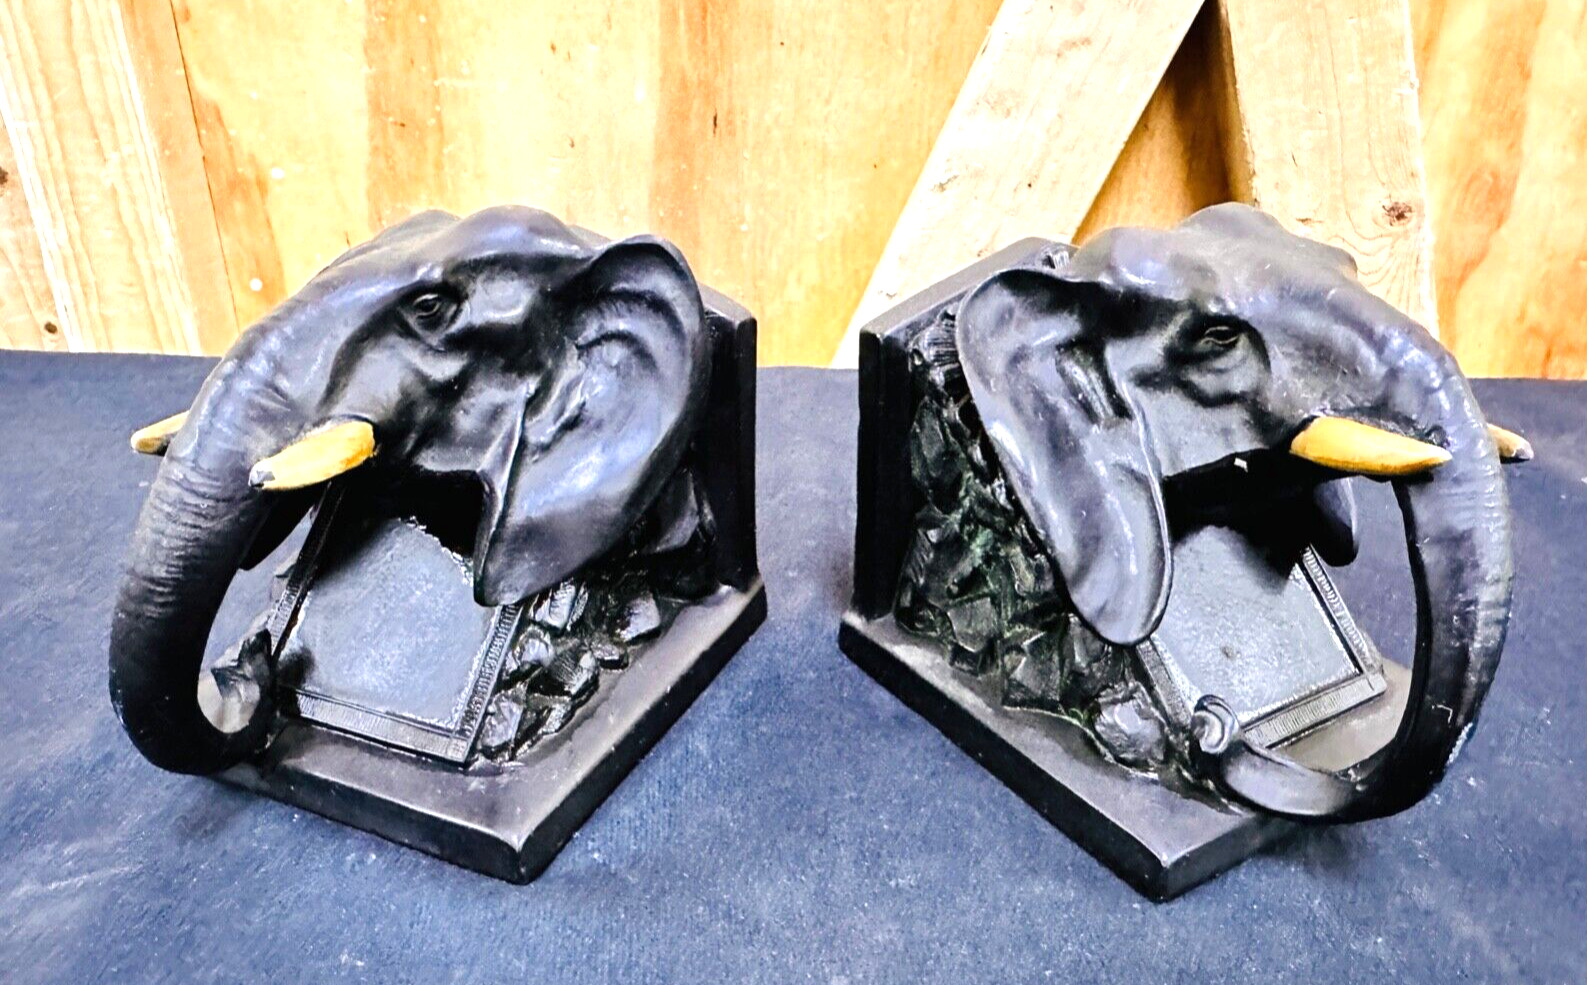 Pair of Ronson All Metal Art Wares Elephant Head Book Ends